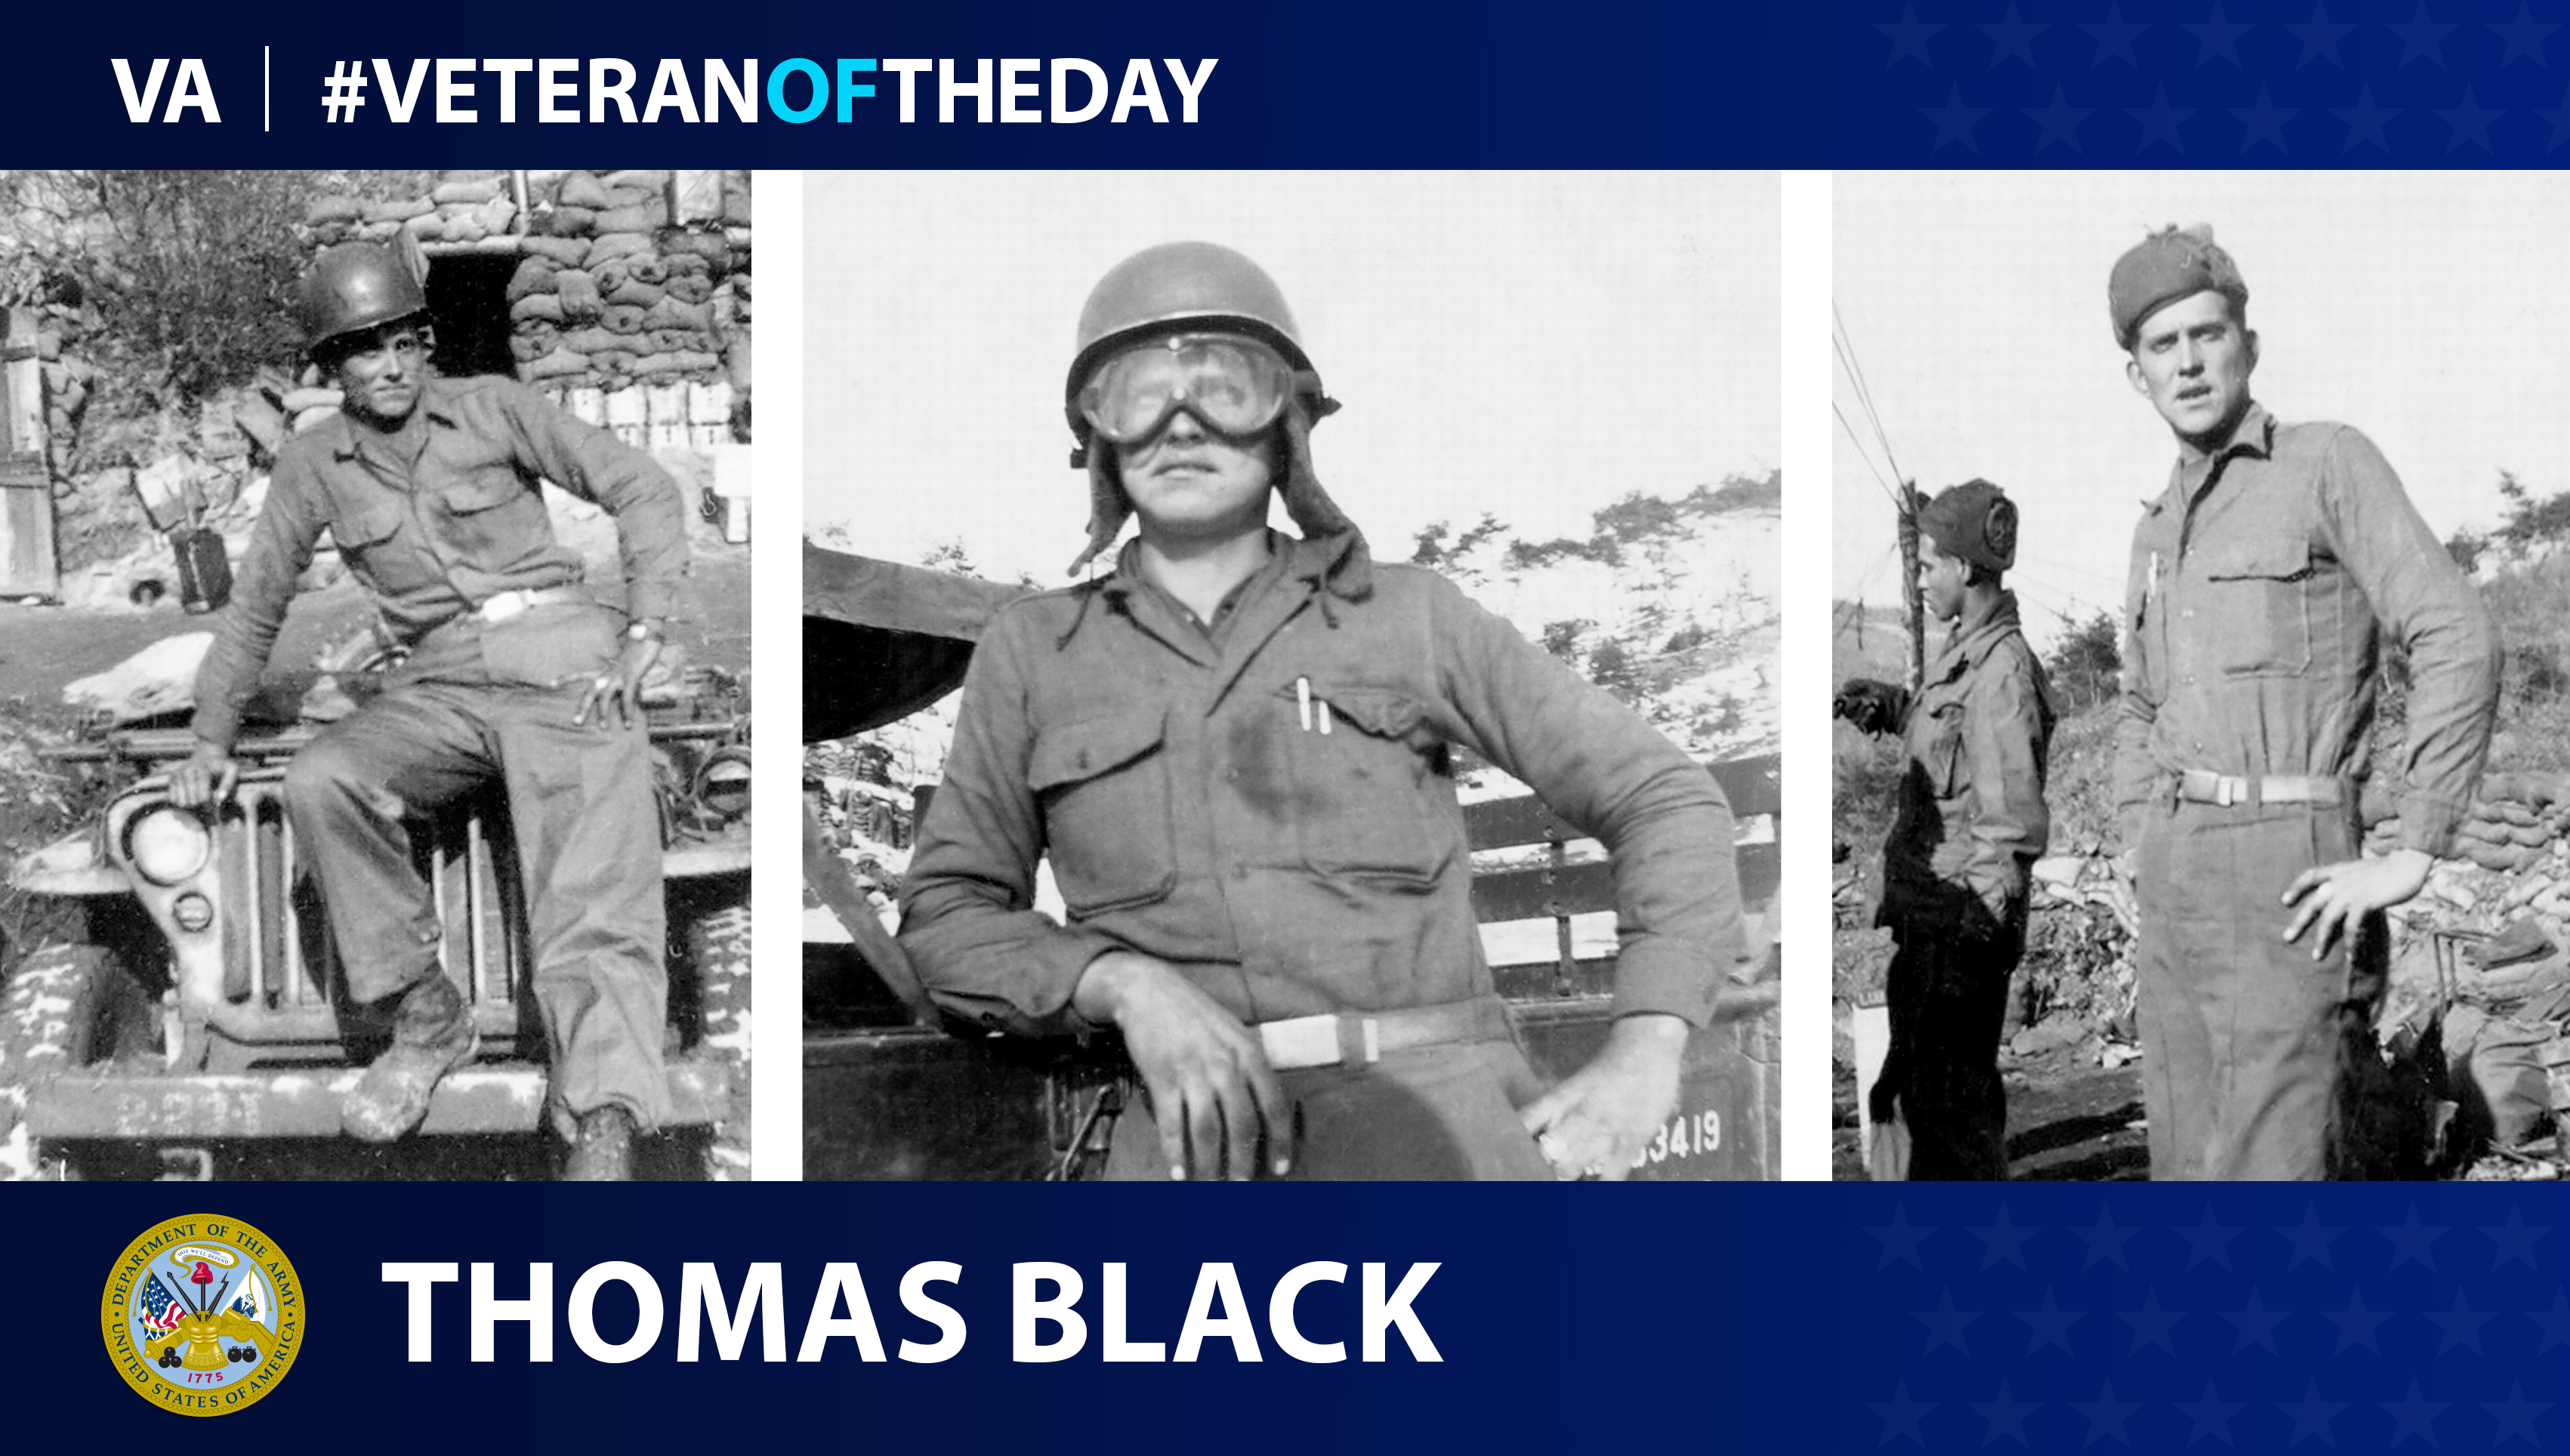 Army Veteran Thomas O. Black is today's Veteran of the Day.